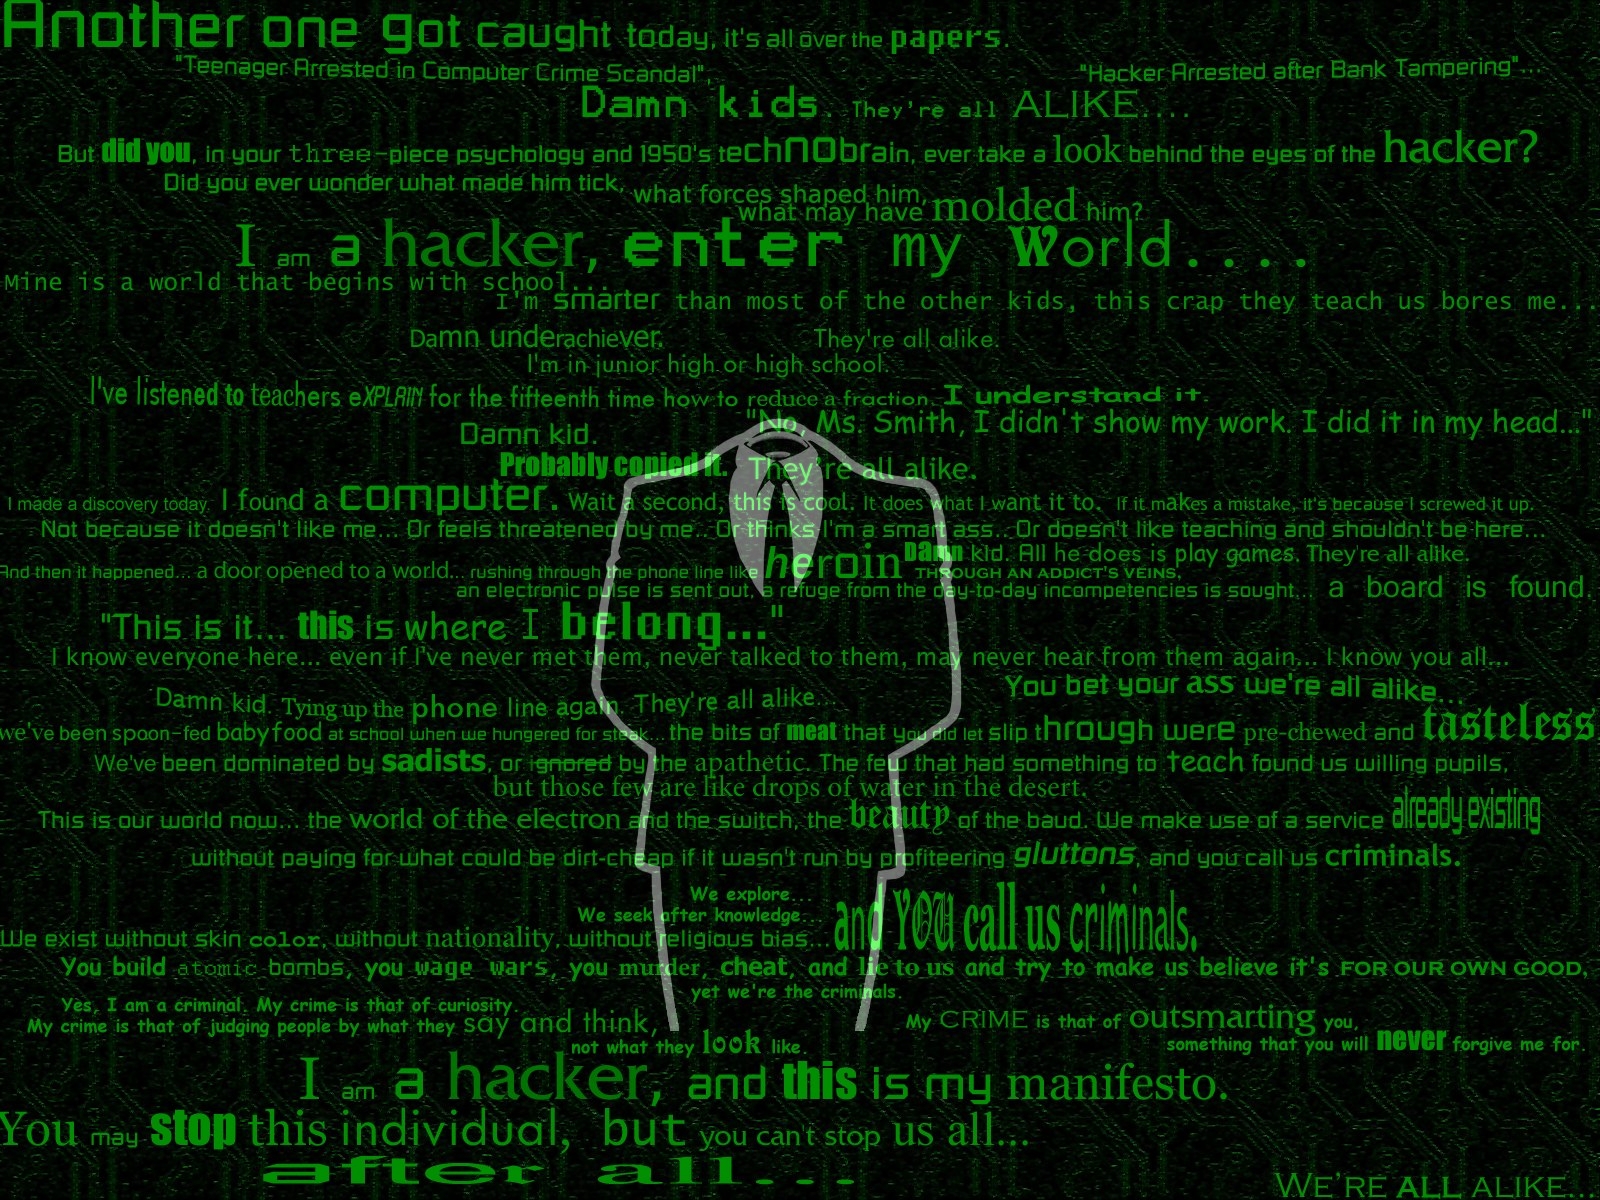 Keep hackers out! | Mbloo